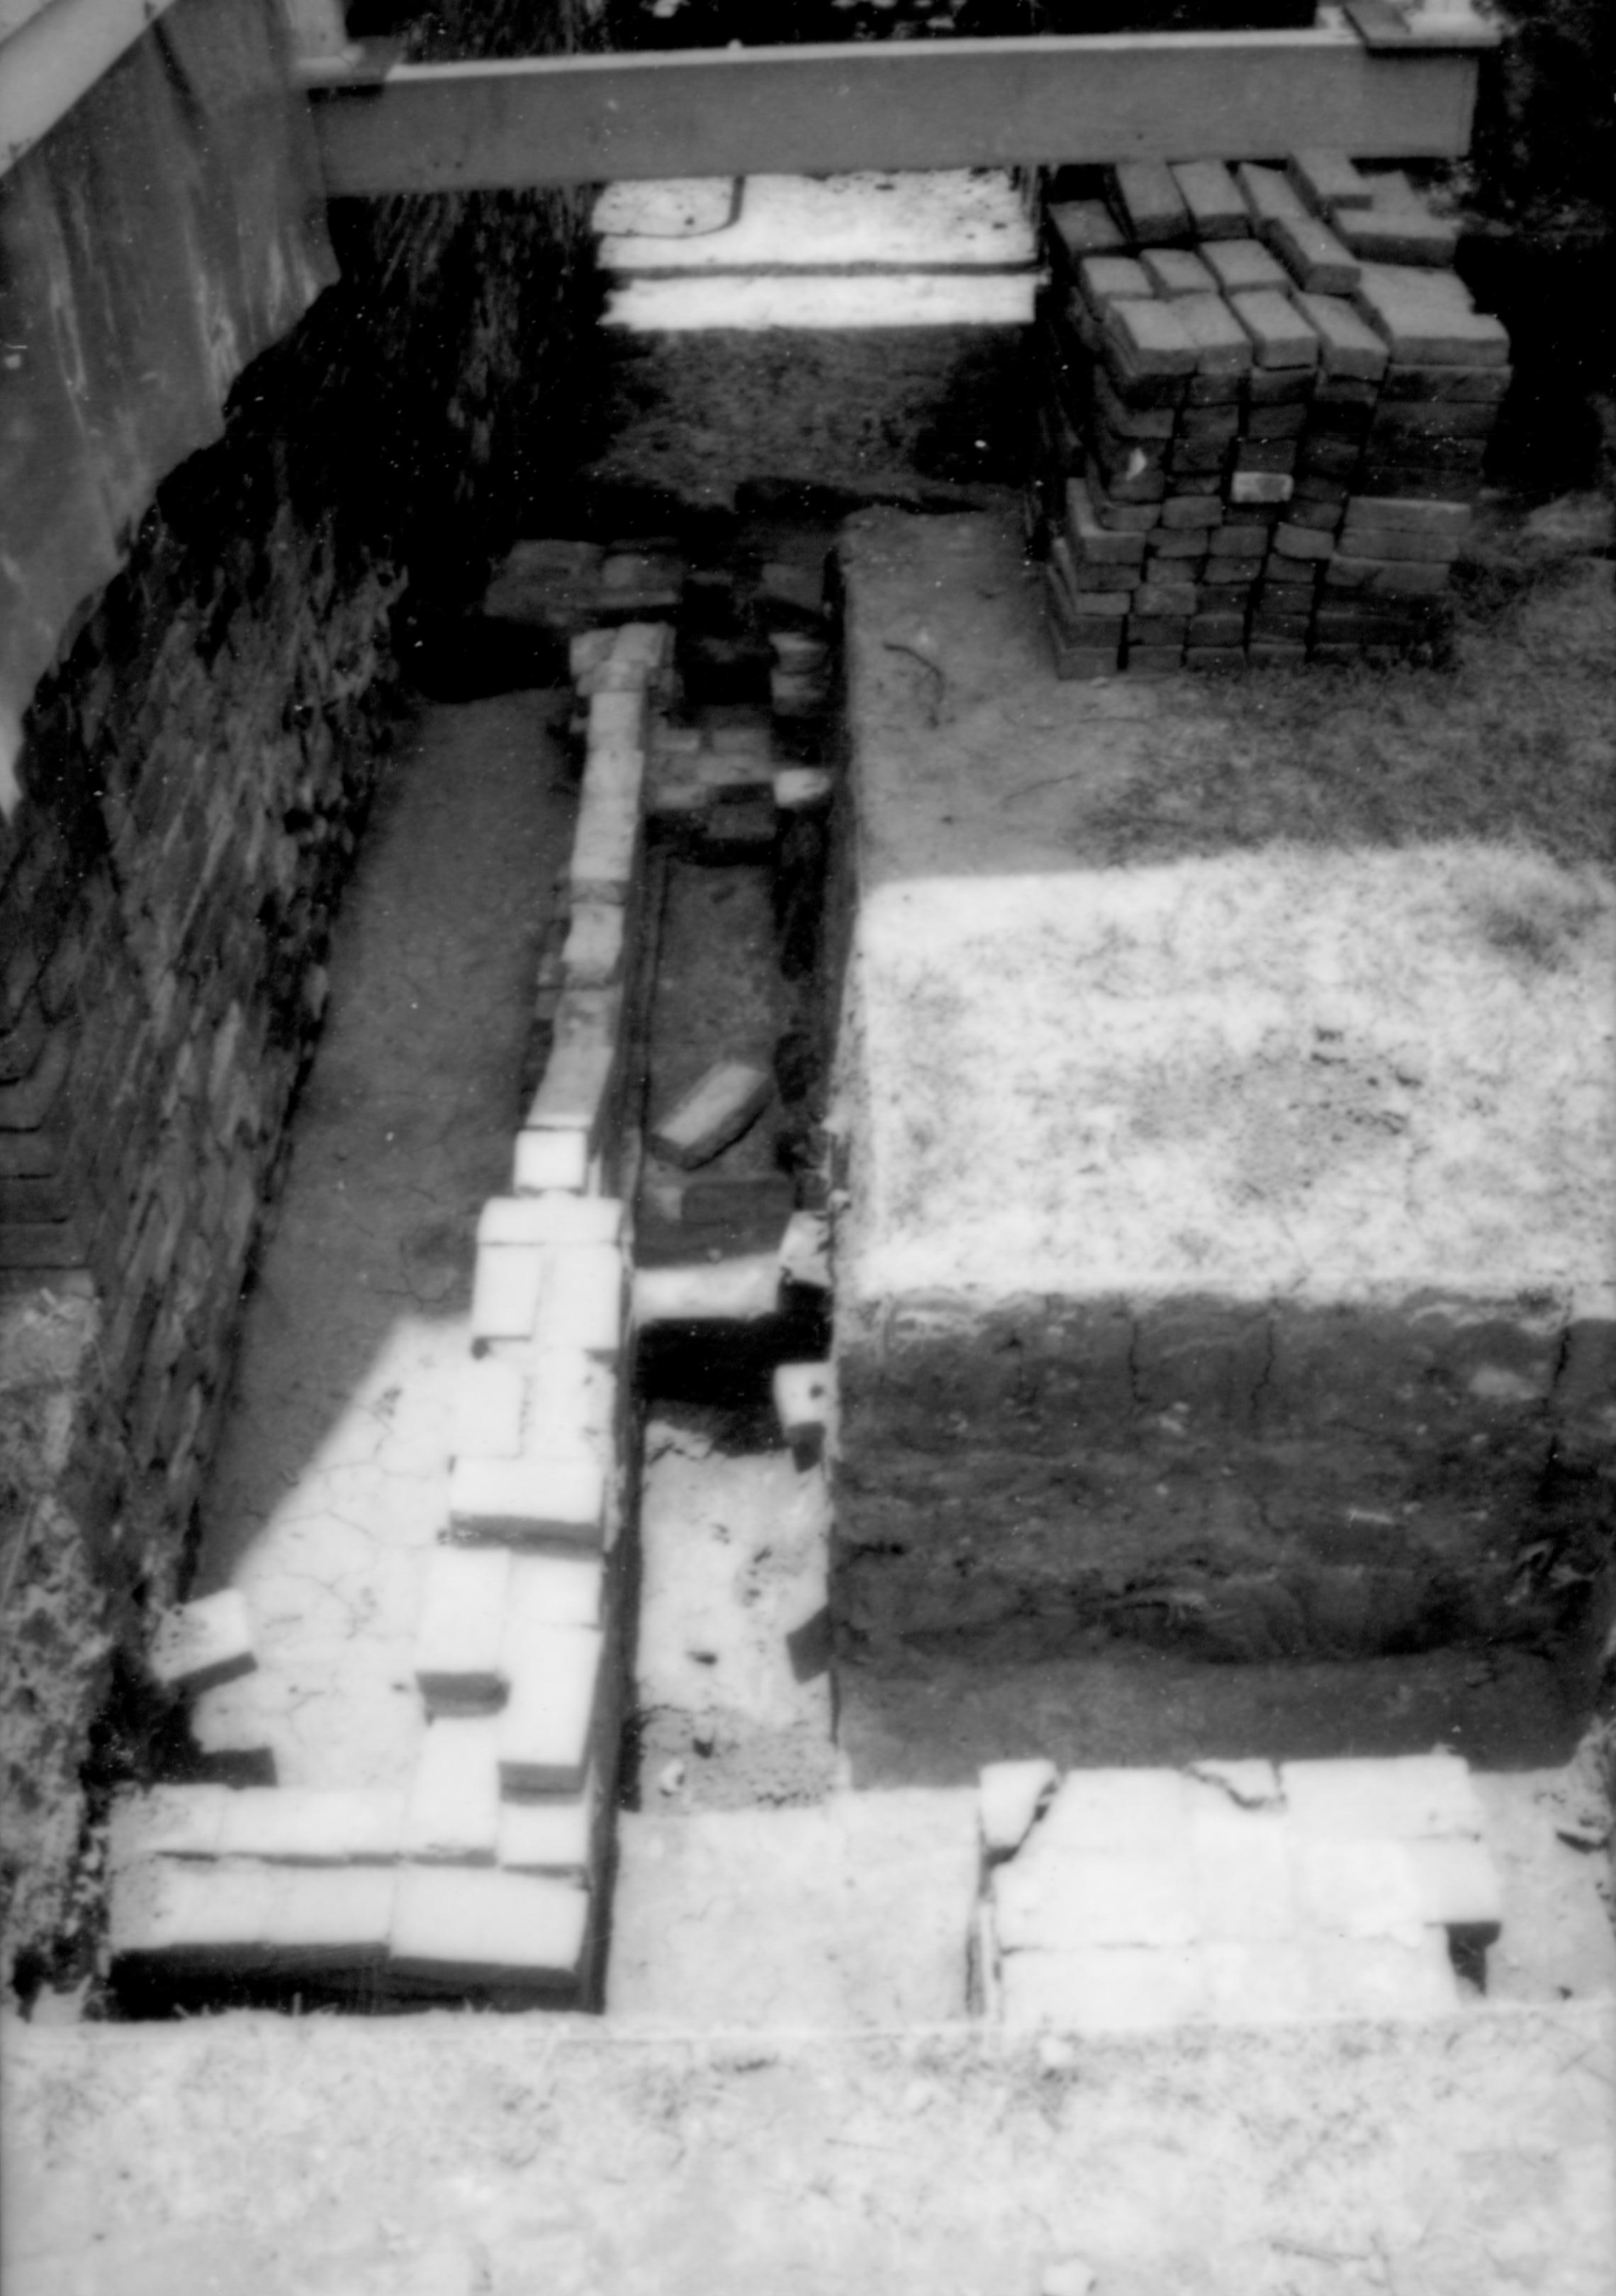 East- Archeological excavation under south porch Lincoln Home NHS, CRS Collections Move, Arnold Barn Foundations, Roll N16, exp 24 Dubois, cistern, excavation